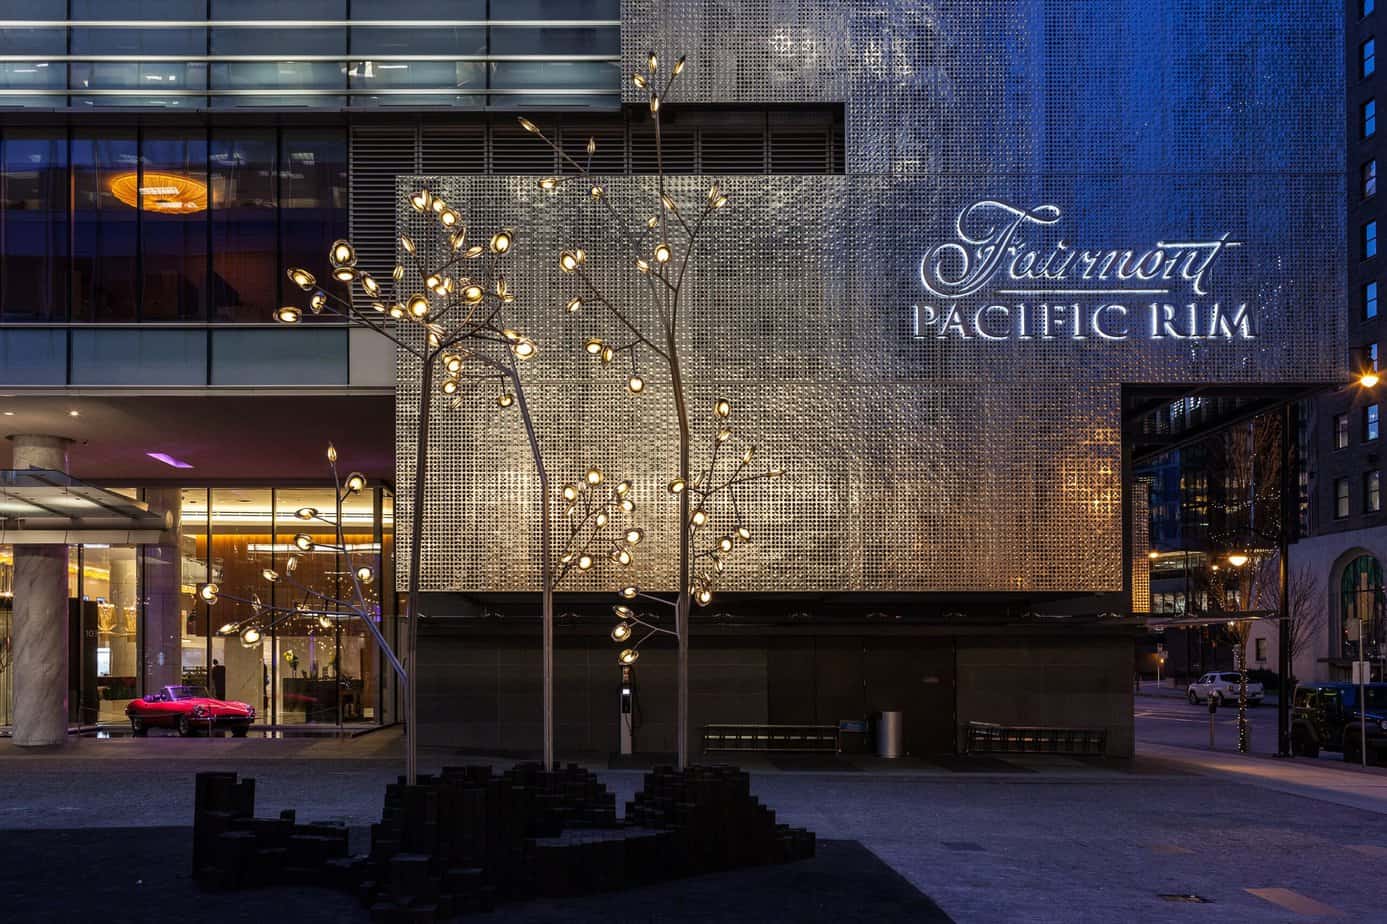 Front facing of the hotel with a silvery background with "Fairmont Pacific Rim" written on front. "Fairmont" is in cursive. Fake tree lights in the middle with a red vintage looking car in the window. Fairmont Pacific Rim is one of the best Vancouver hotels with outdoor pools.